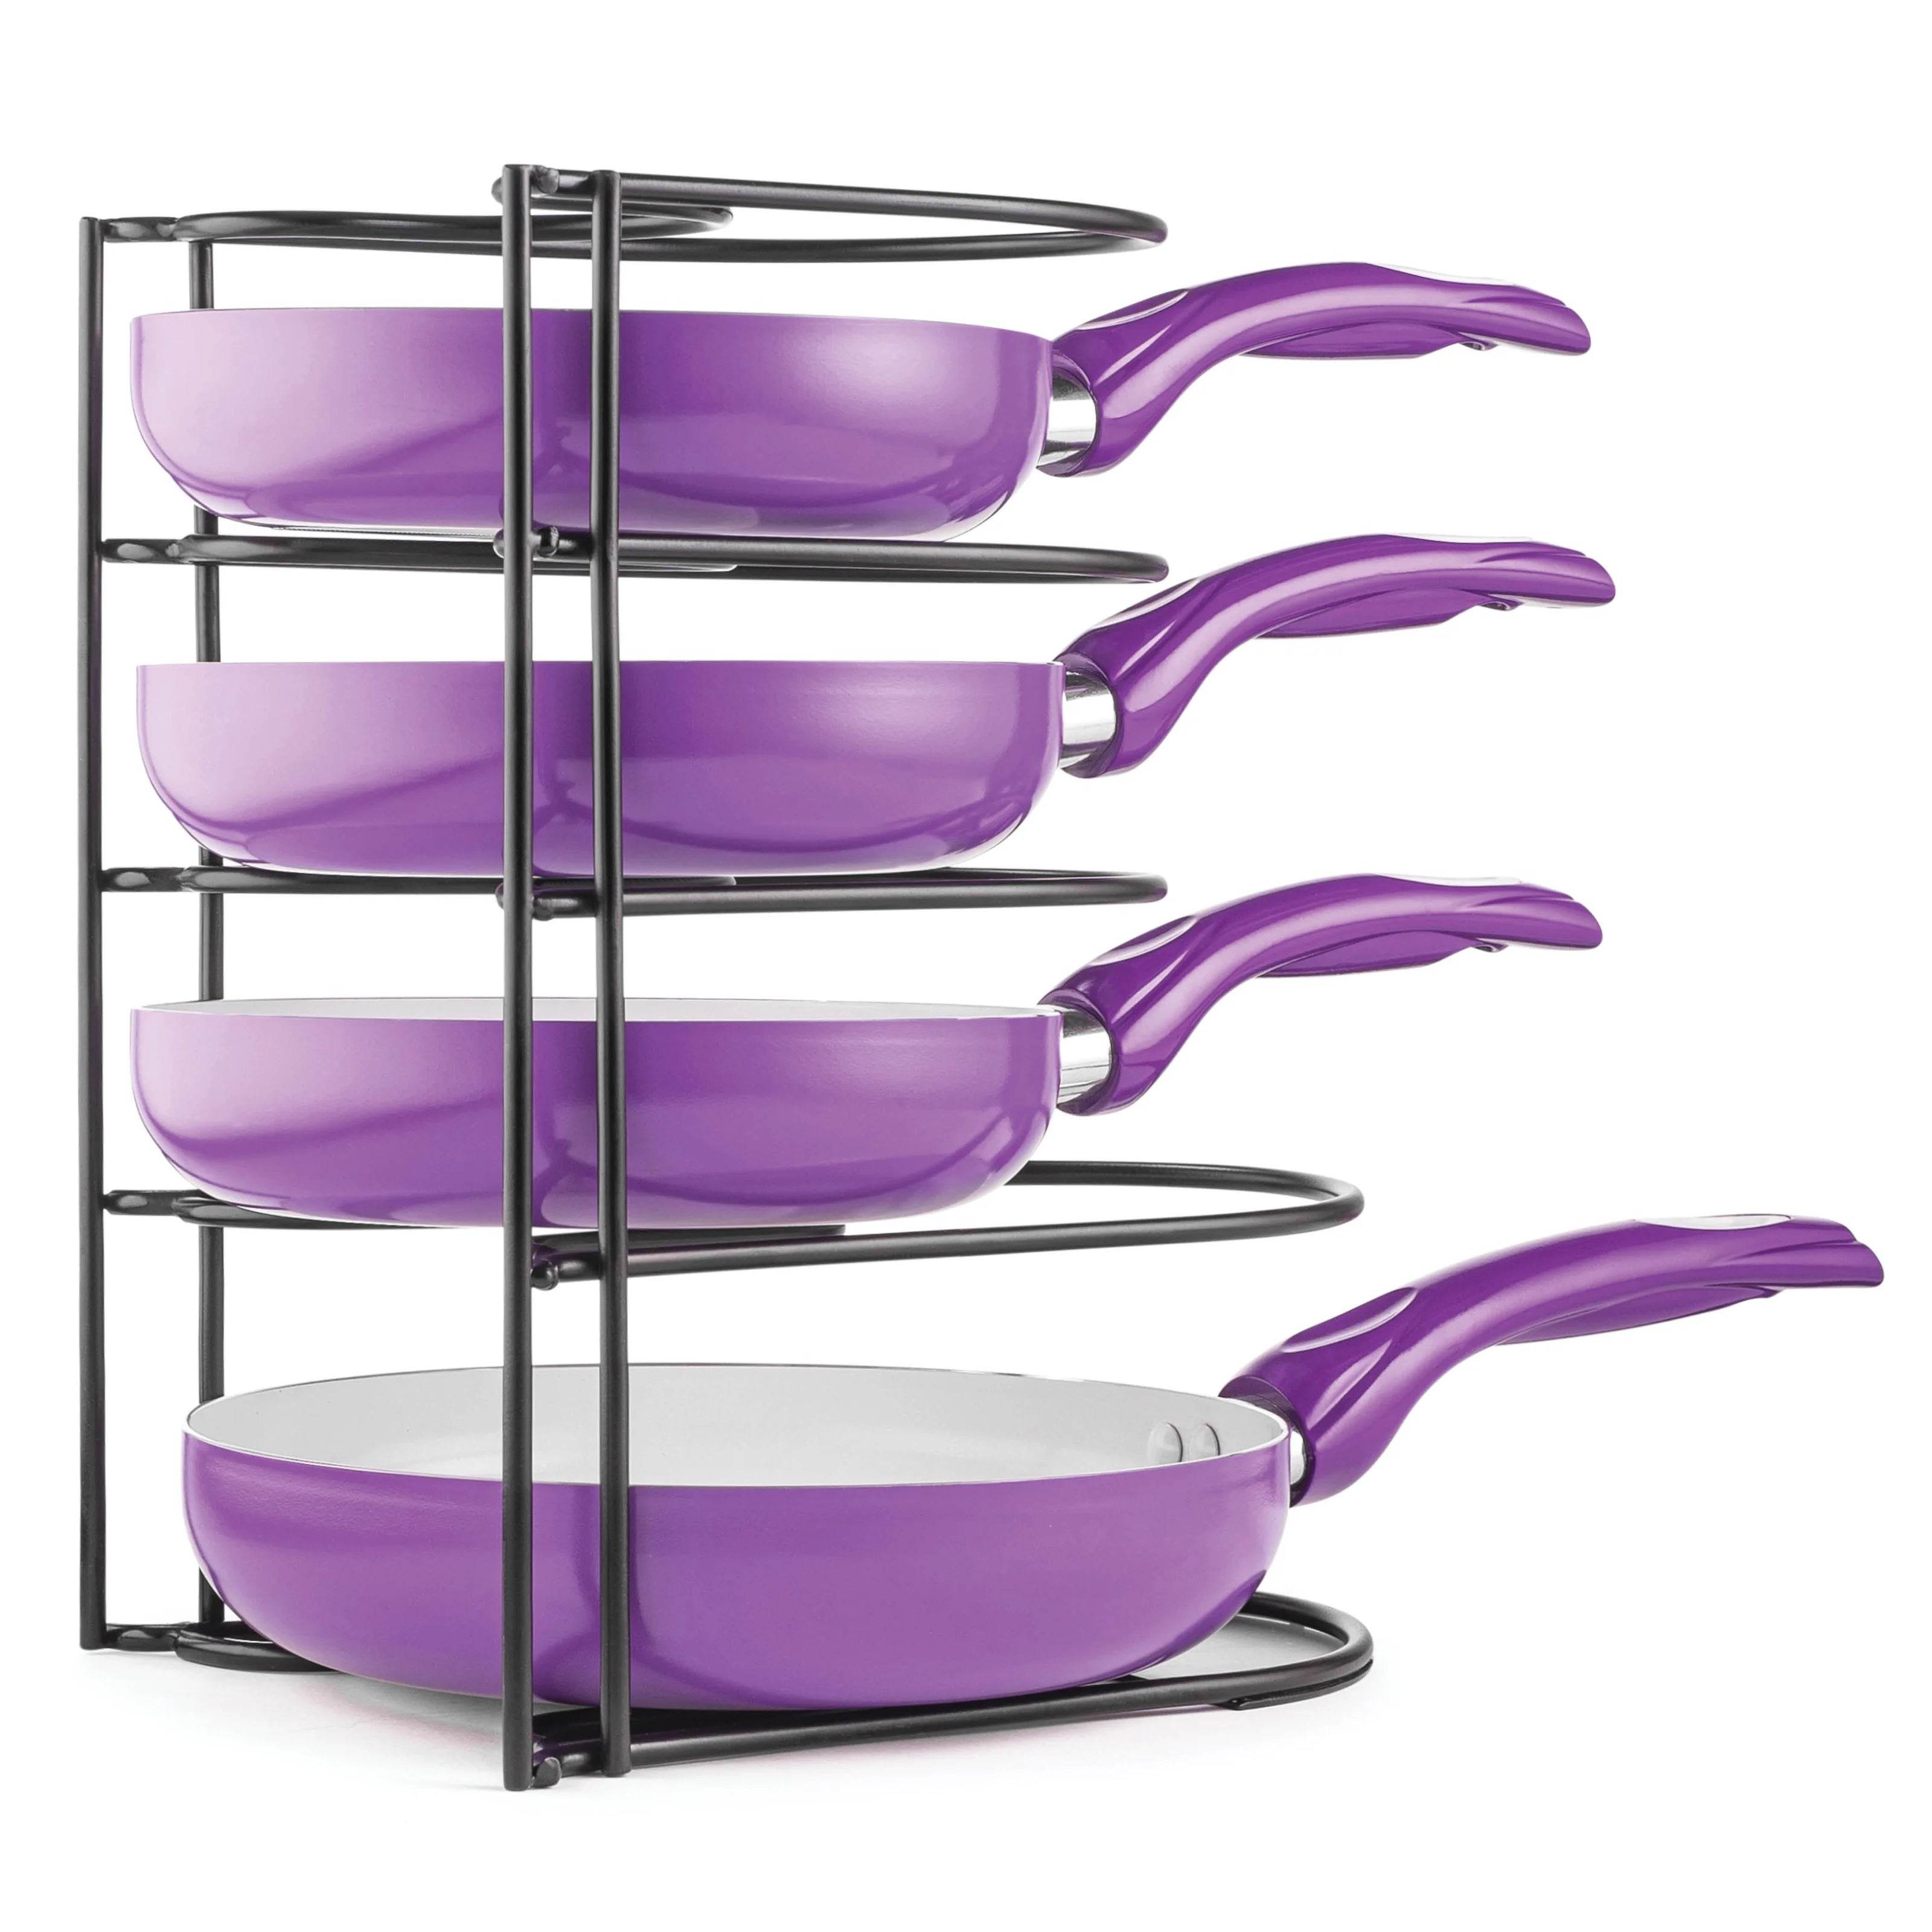 A set of purple pans in a black pan holder